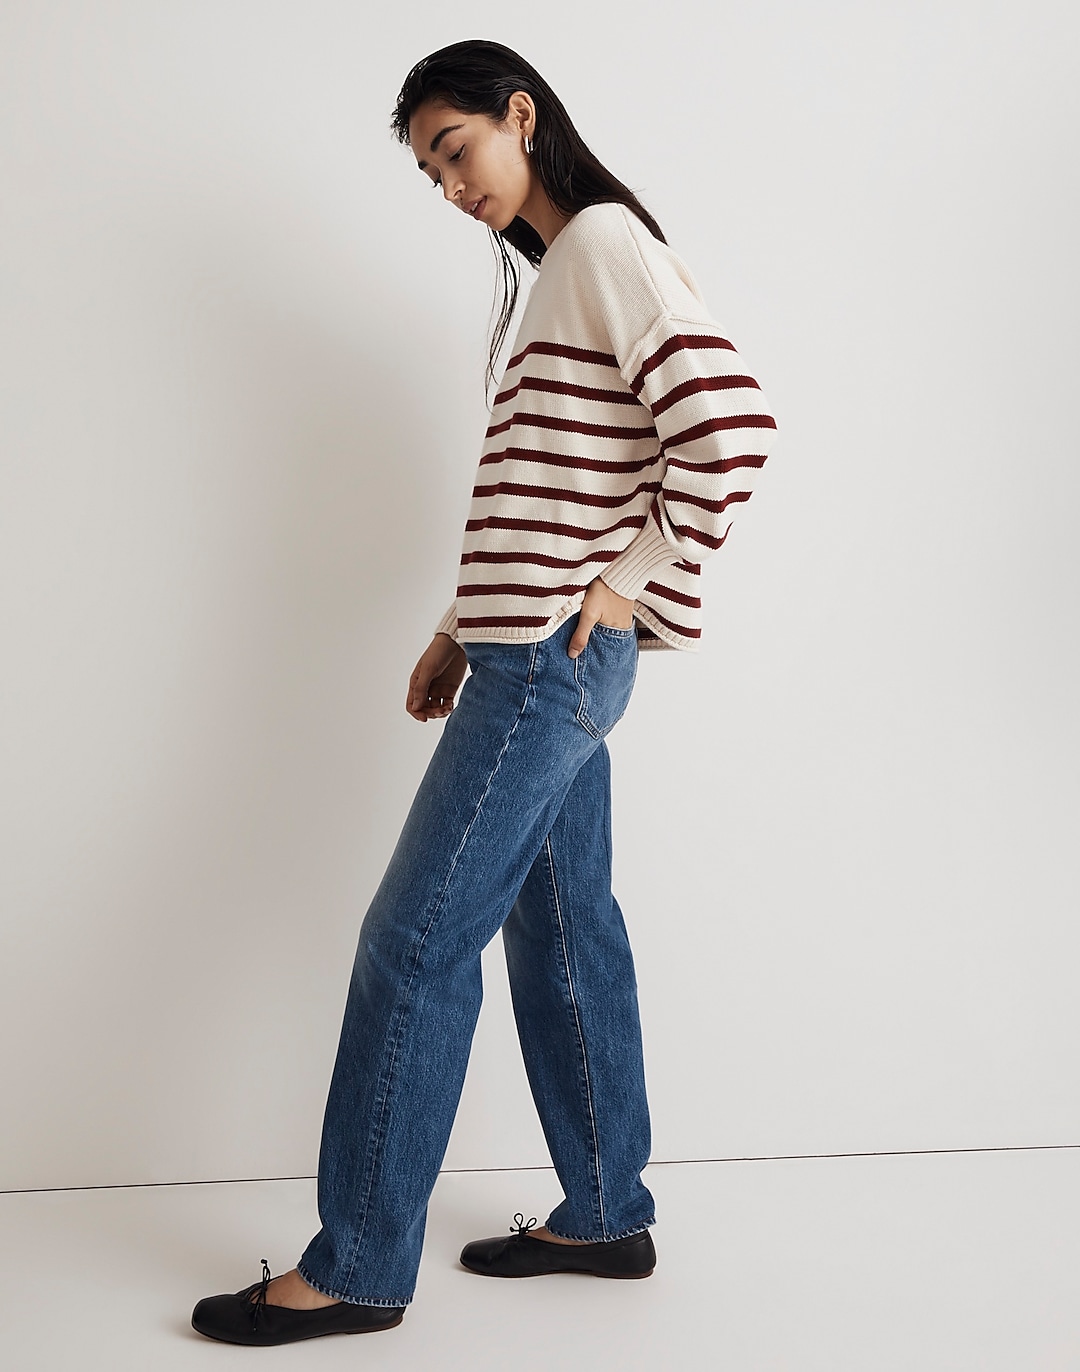 Conway Pullover Sweater in Stripe | Madewell